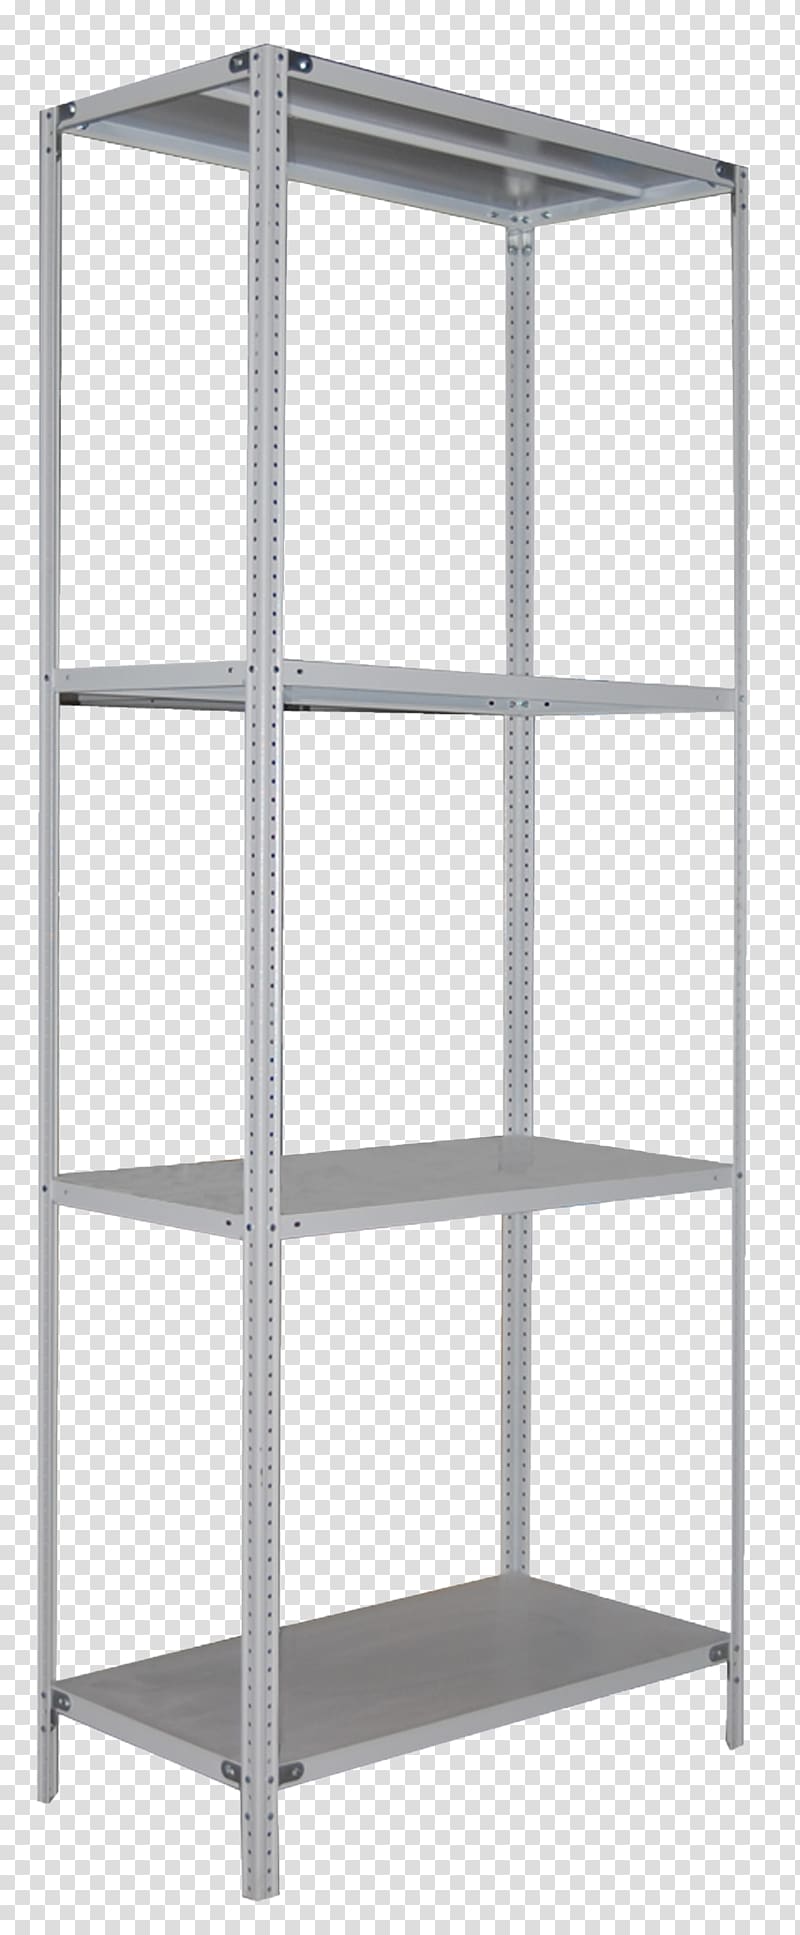 Stillage Warehouse Metal Price Sales, clothing x display rack transparent background PNG clipart